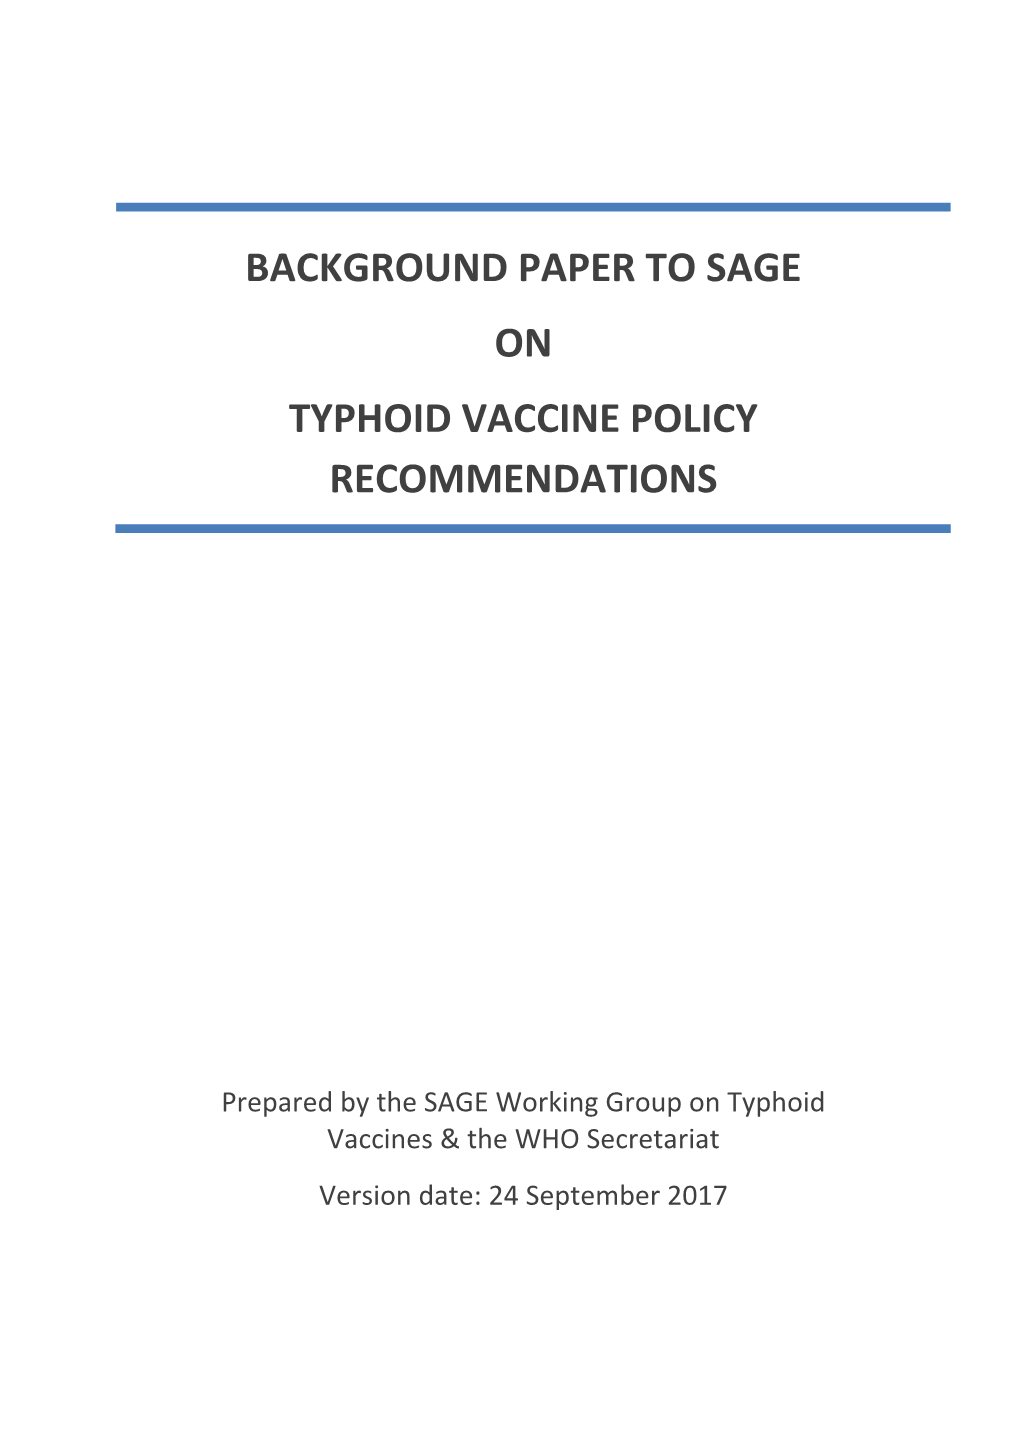 Background Paper to Sage on Typhoid Vaccine Policy